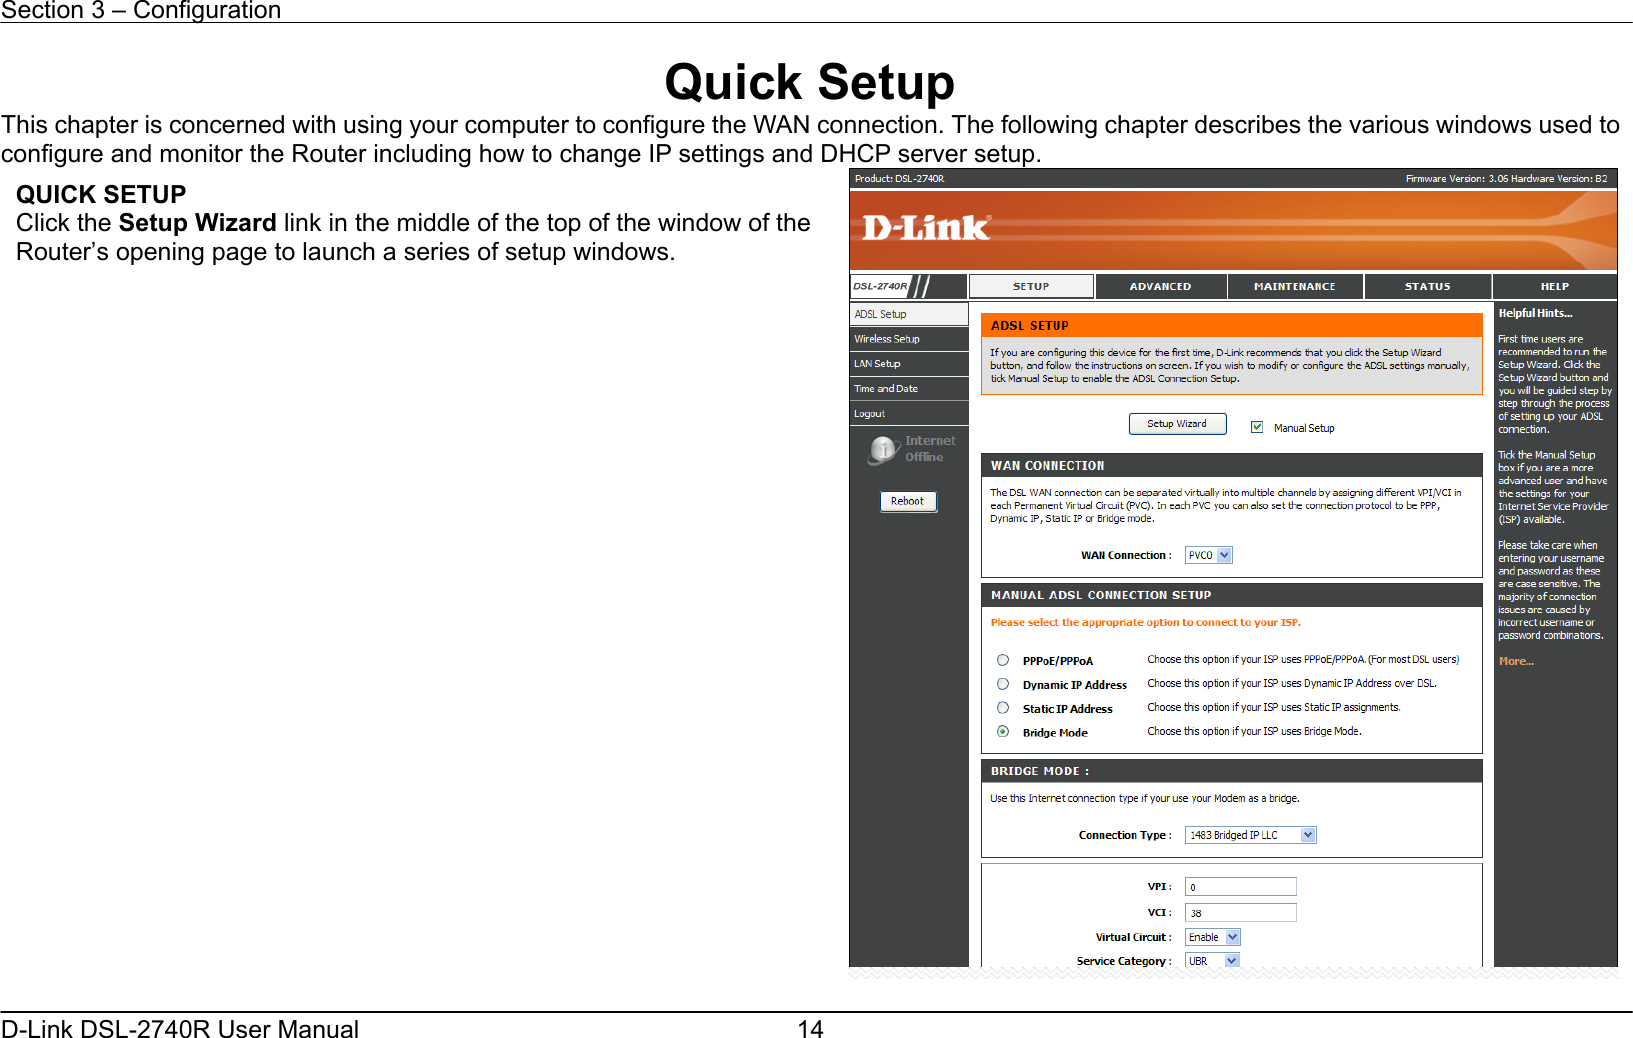 Section 3 – Configuration   D-Link DSL-2740R User Manual  14Quick Setup This chapter is concerned with using your computer to configure the WAN connection. The following chapter describes the various windows used to configure and monitor the Router including how to change IP settings and DHCP server setup.   QUICK SETUP Click the Setup Wizard link in the middle of the top of the window of the Router’s opening page to launch a series of setup windows. 